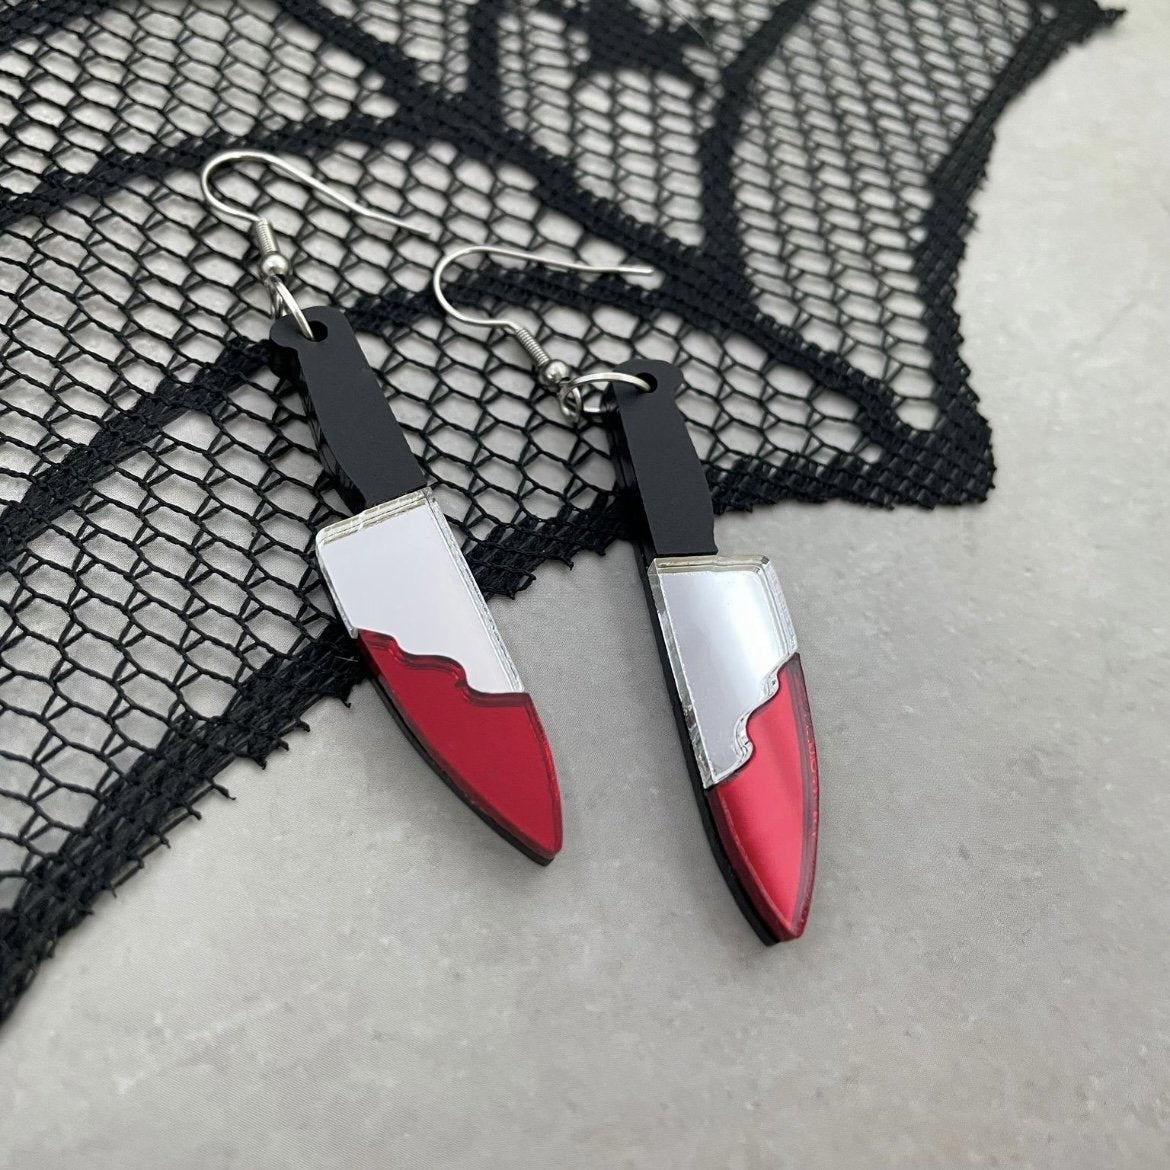 Mirror Knife Earrings - Lost Minds Clothing